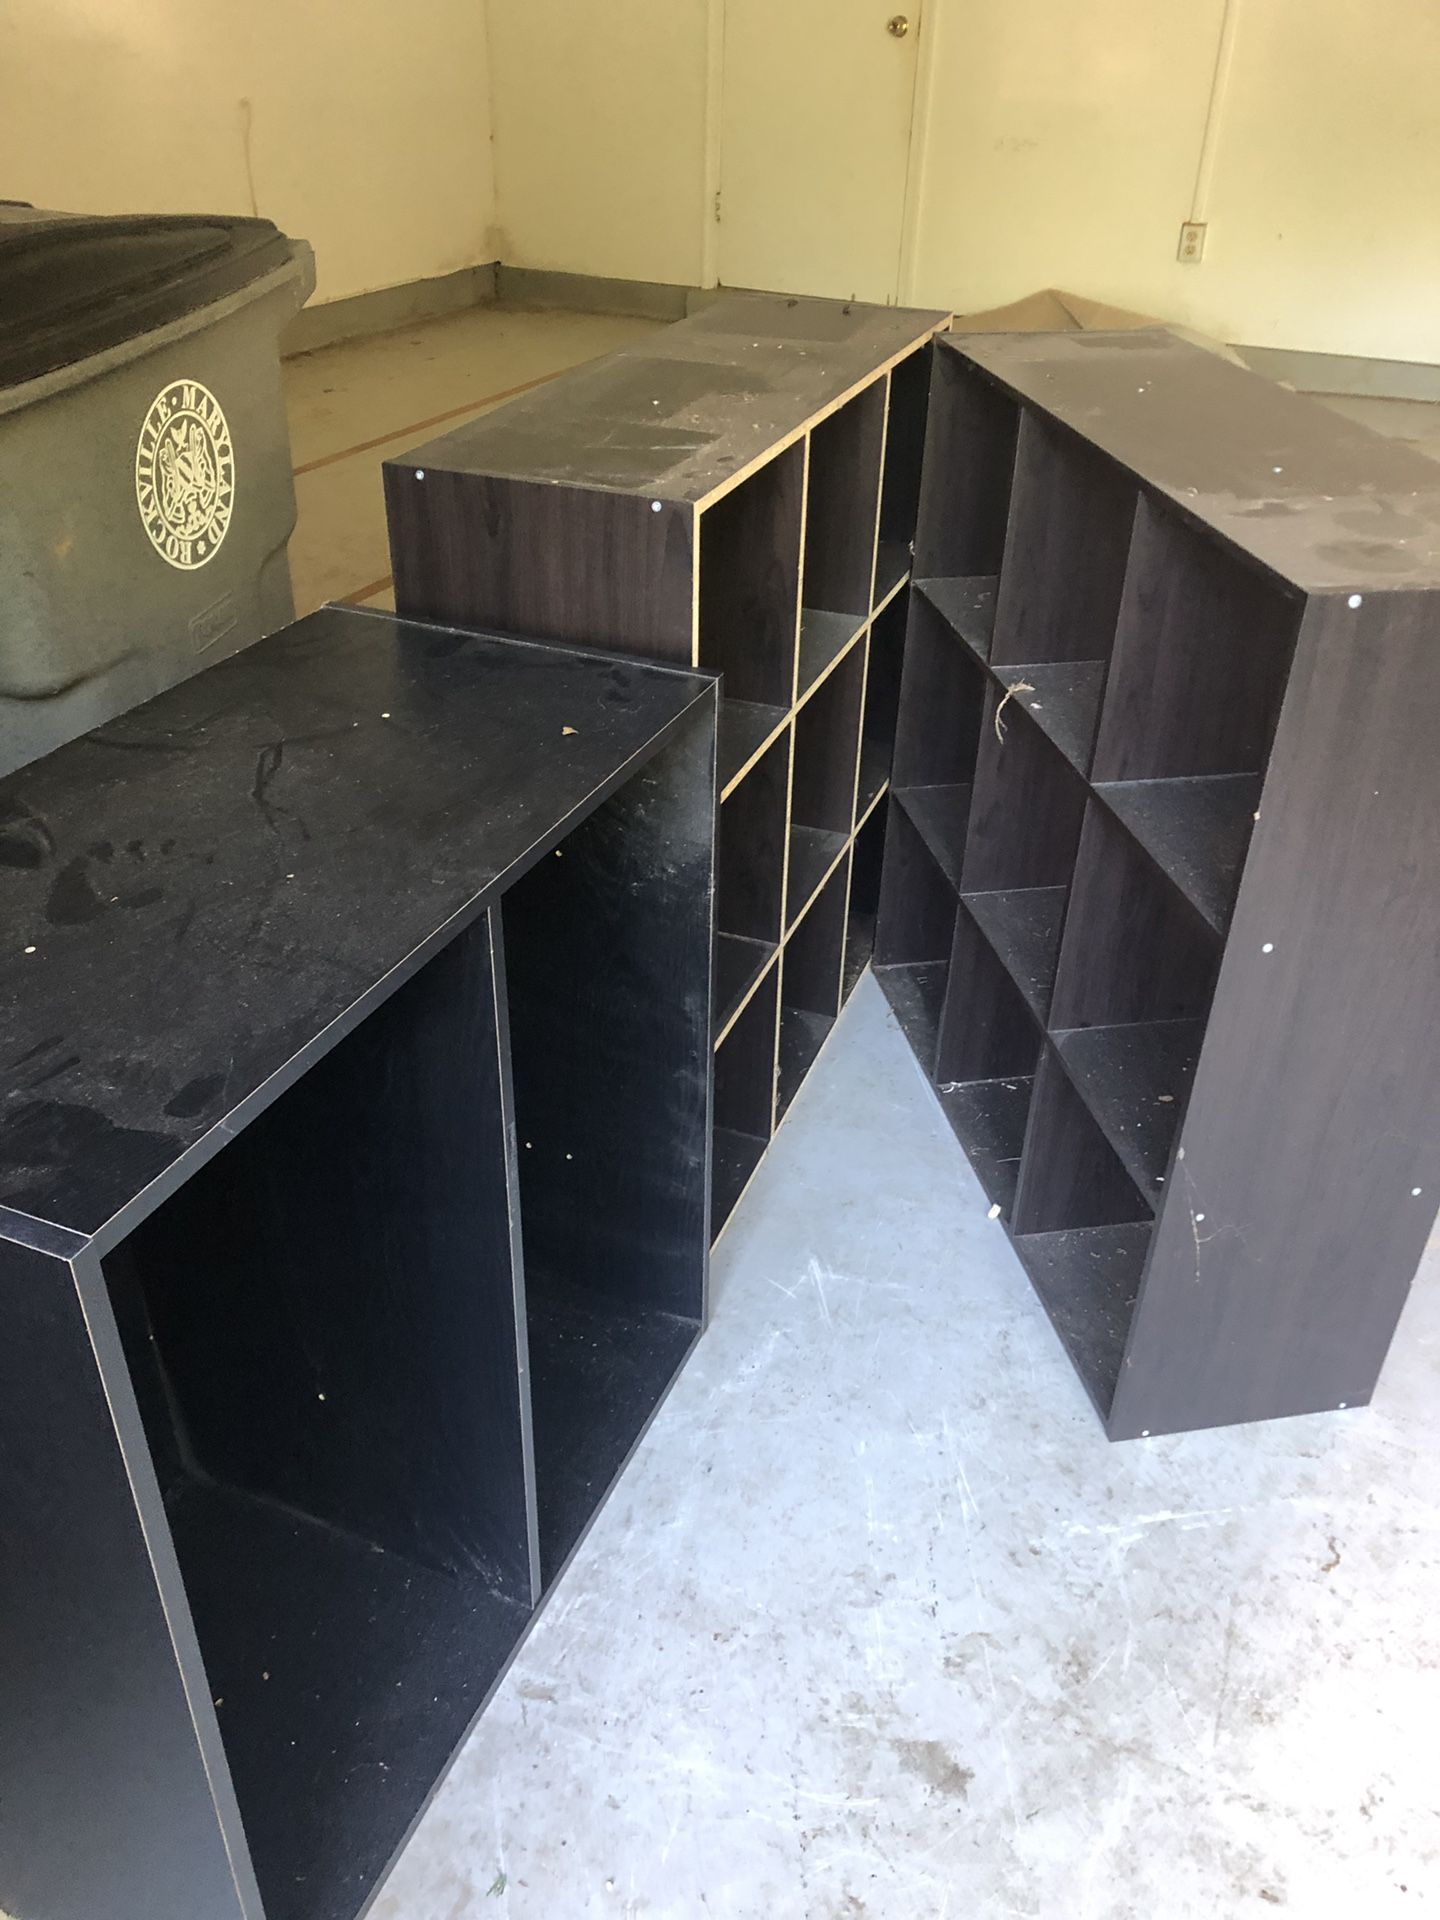 FREE Cube storage - must pick up in Rockville by 8/21